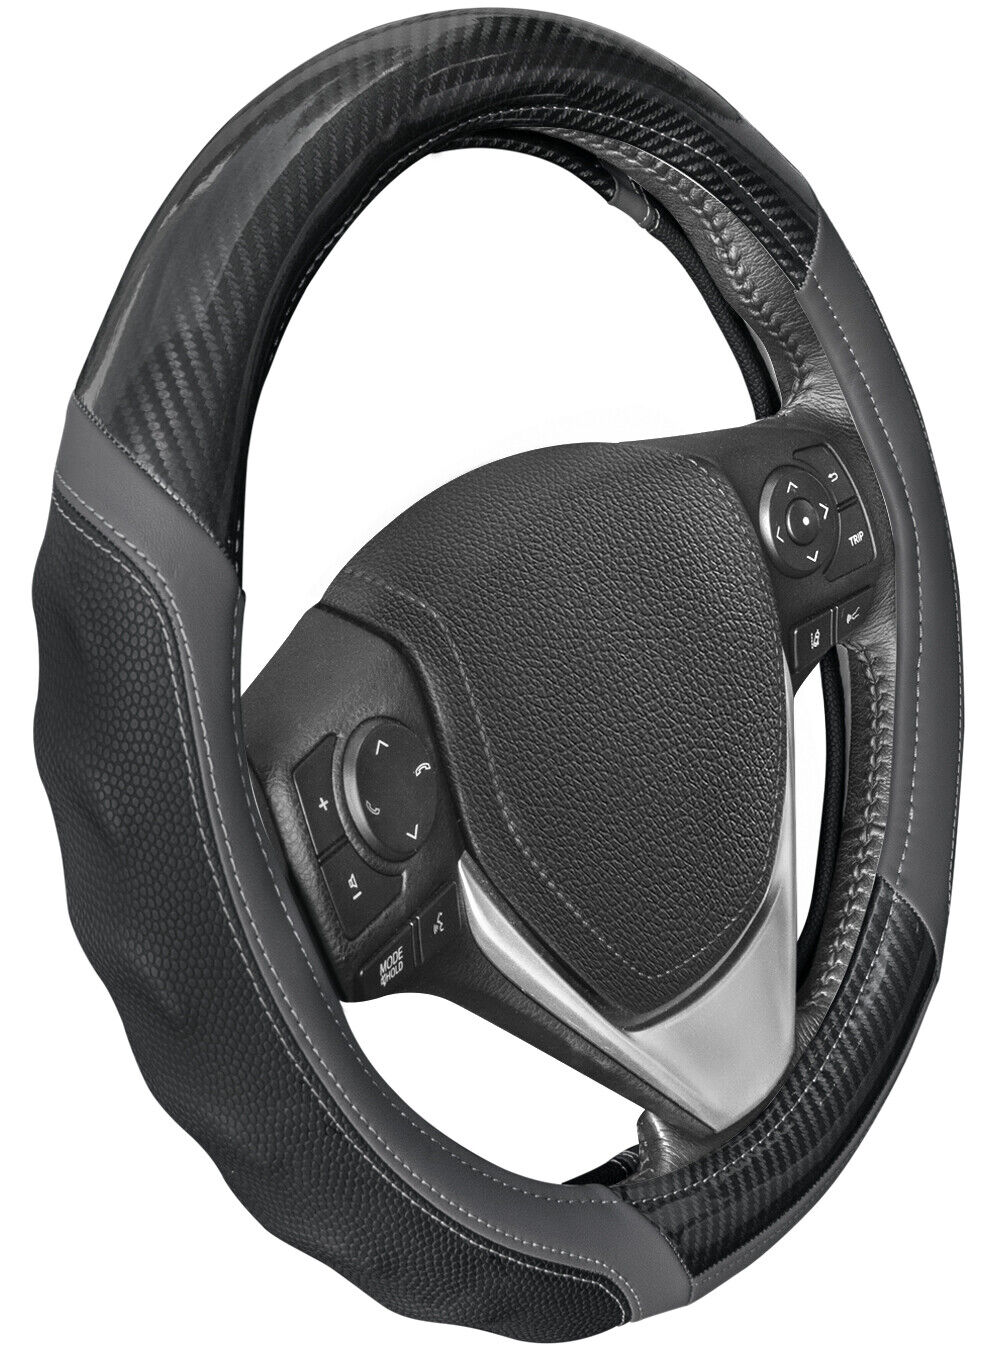 MotorTrend Carbon Fiber Leather Steering Wheel Cover Universal Fit for Cars